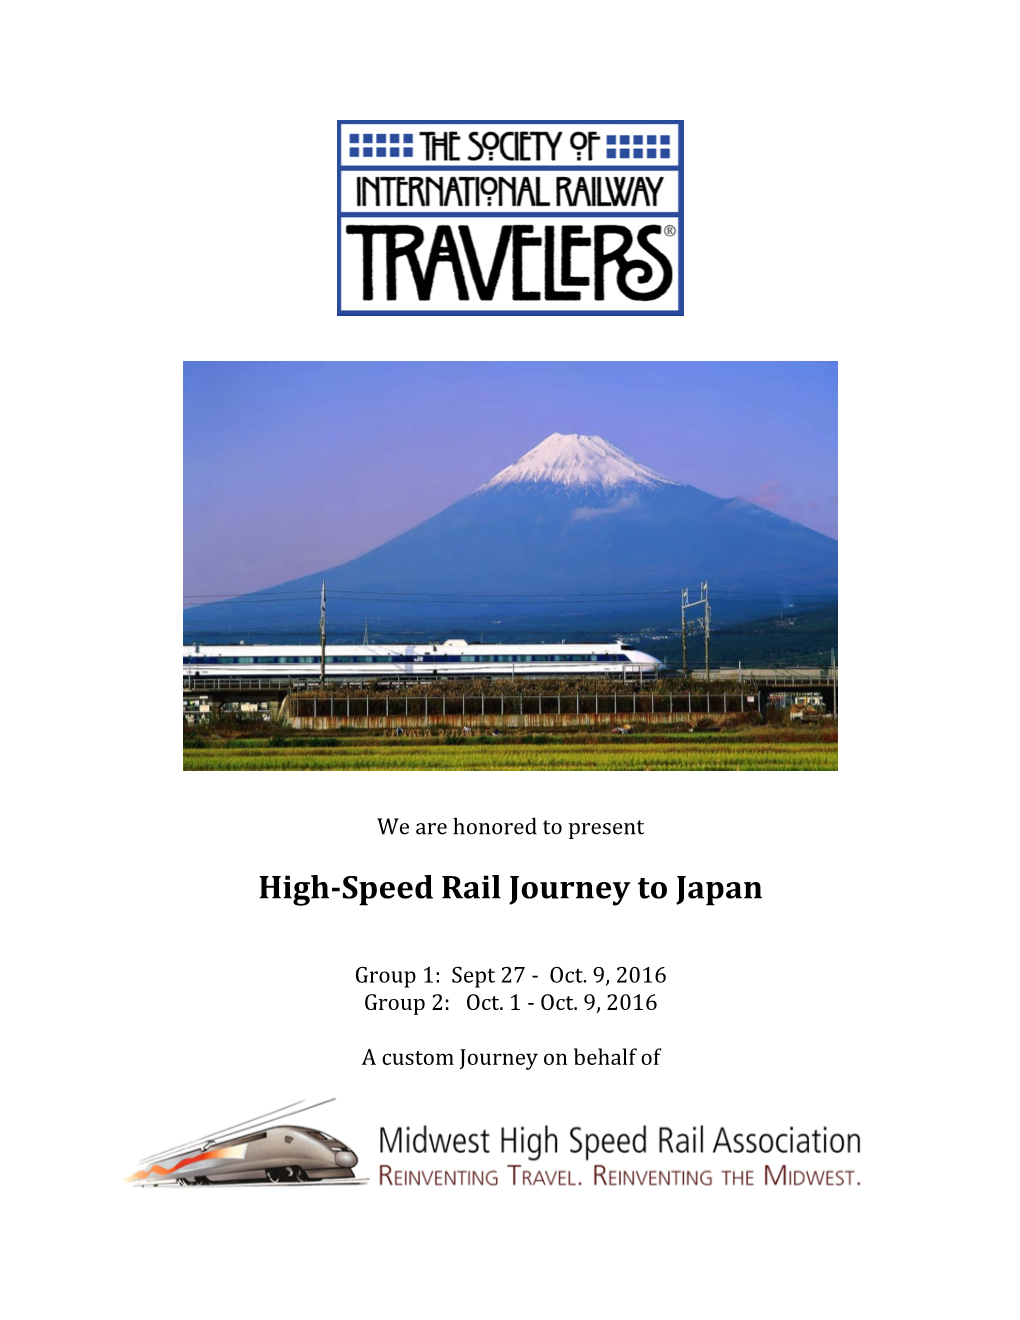 High-Speed Rail Journey to Japan